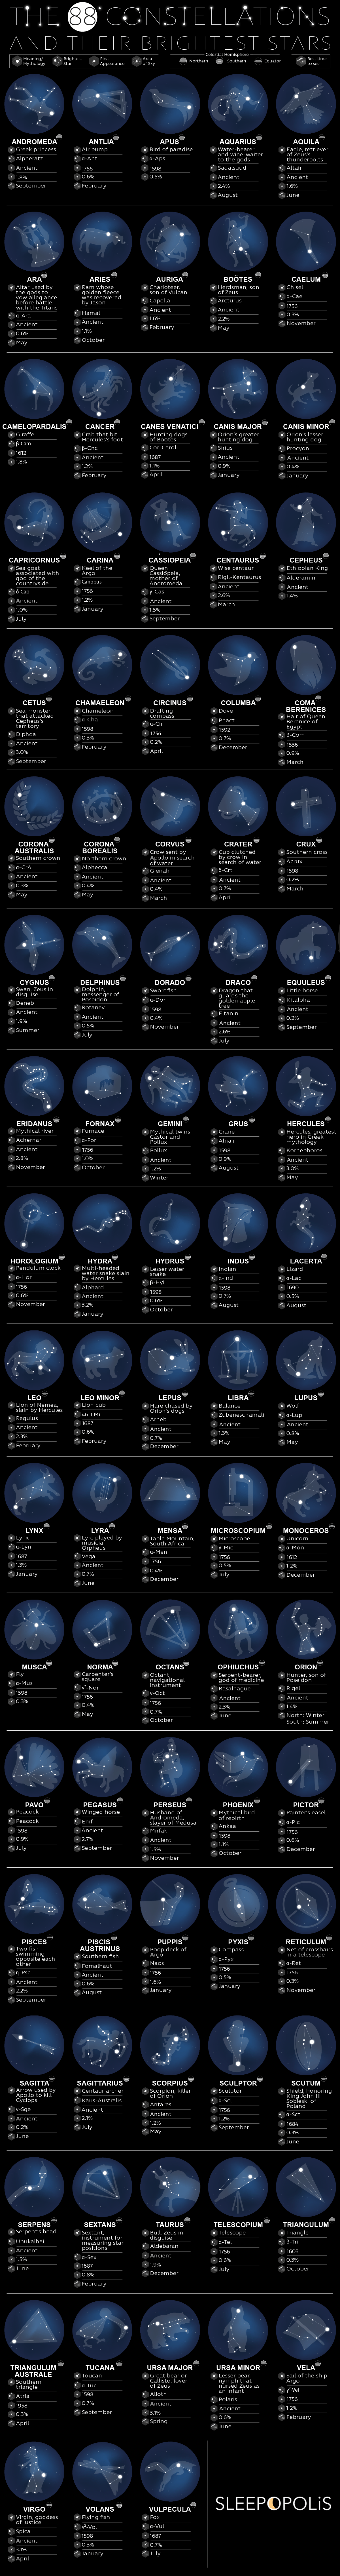 The 88 Constellations and Their Brightest Stars - Sleepopolis.com - Infographic